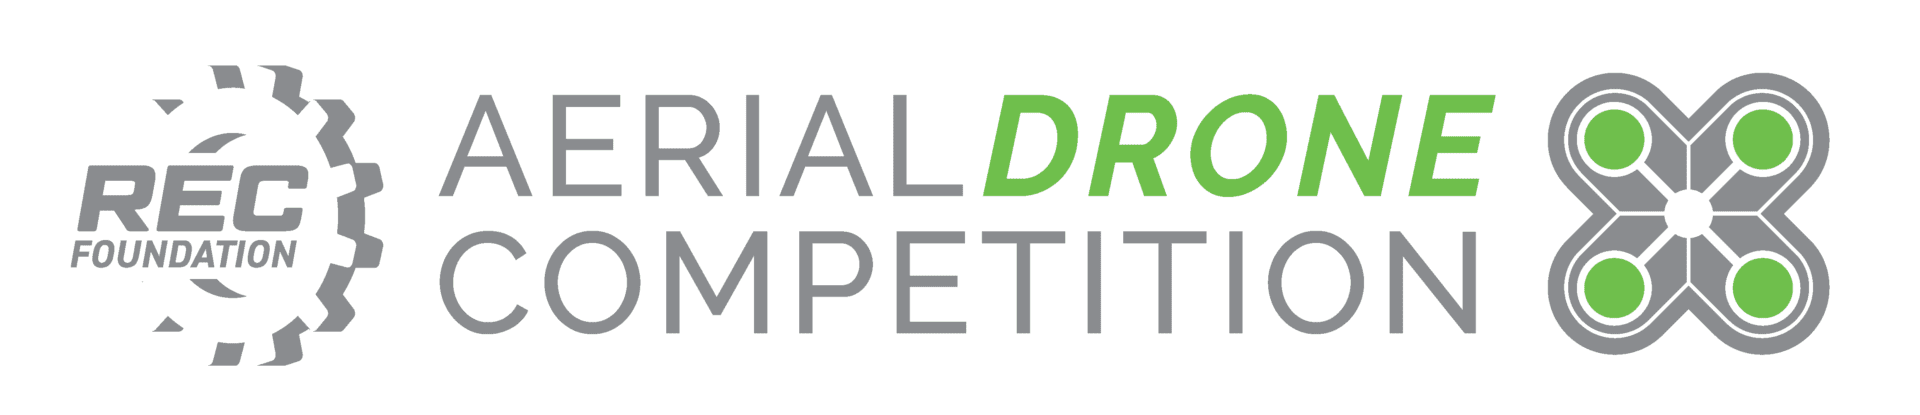 Aerial Drone Competition logo with gray color with no background